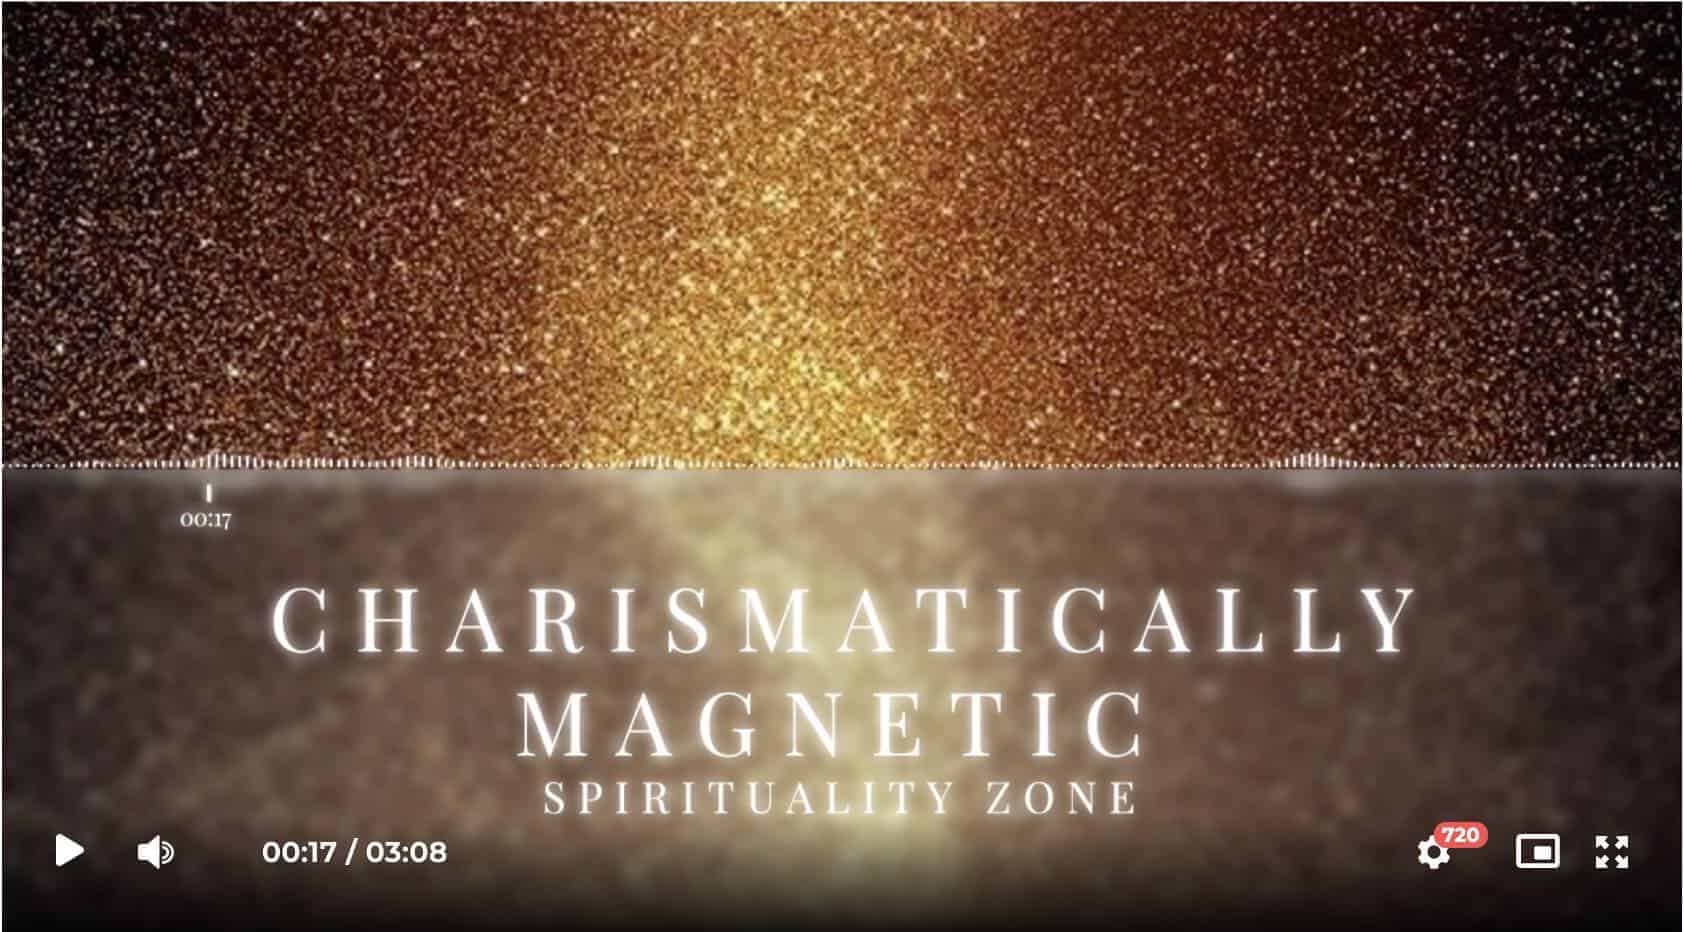 Become Charismatically Magnetic (Divine Magnetic Presence)